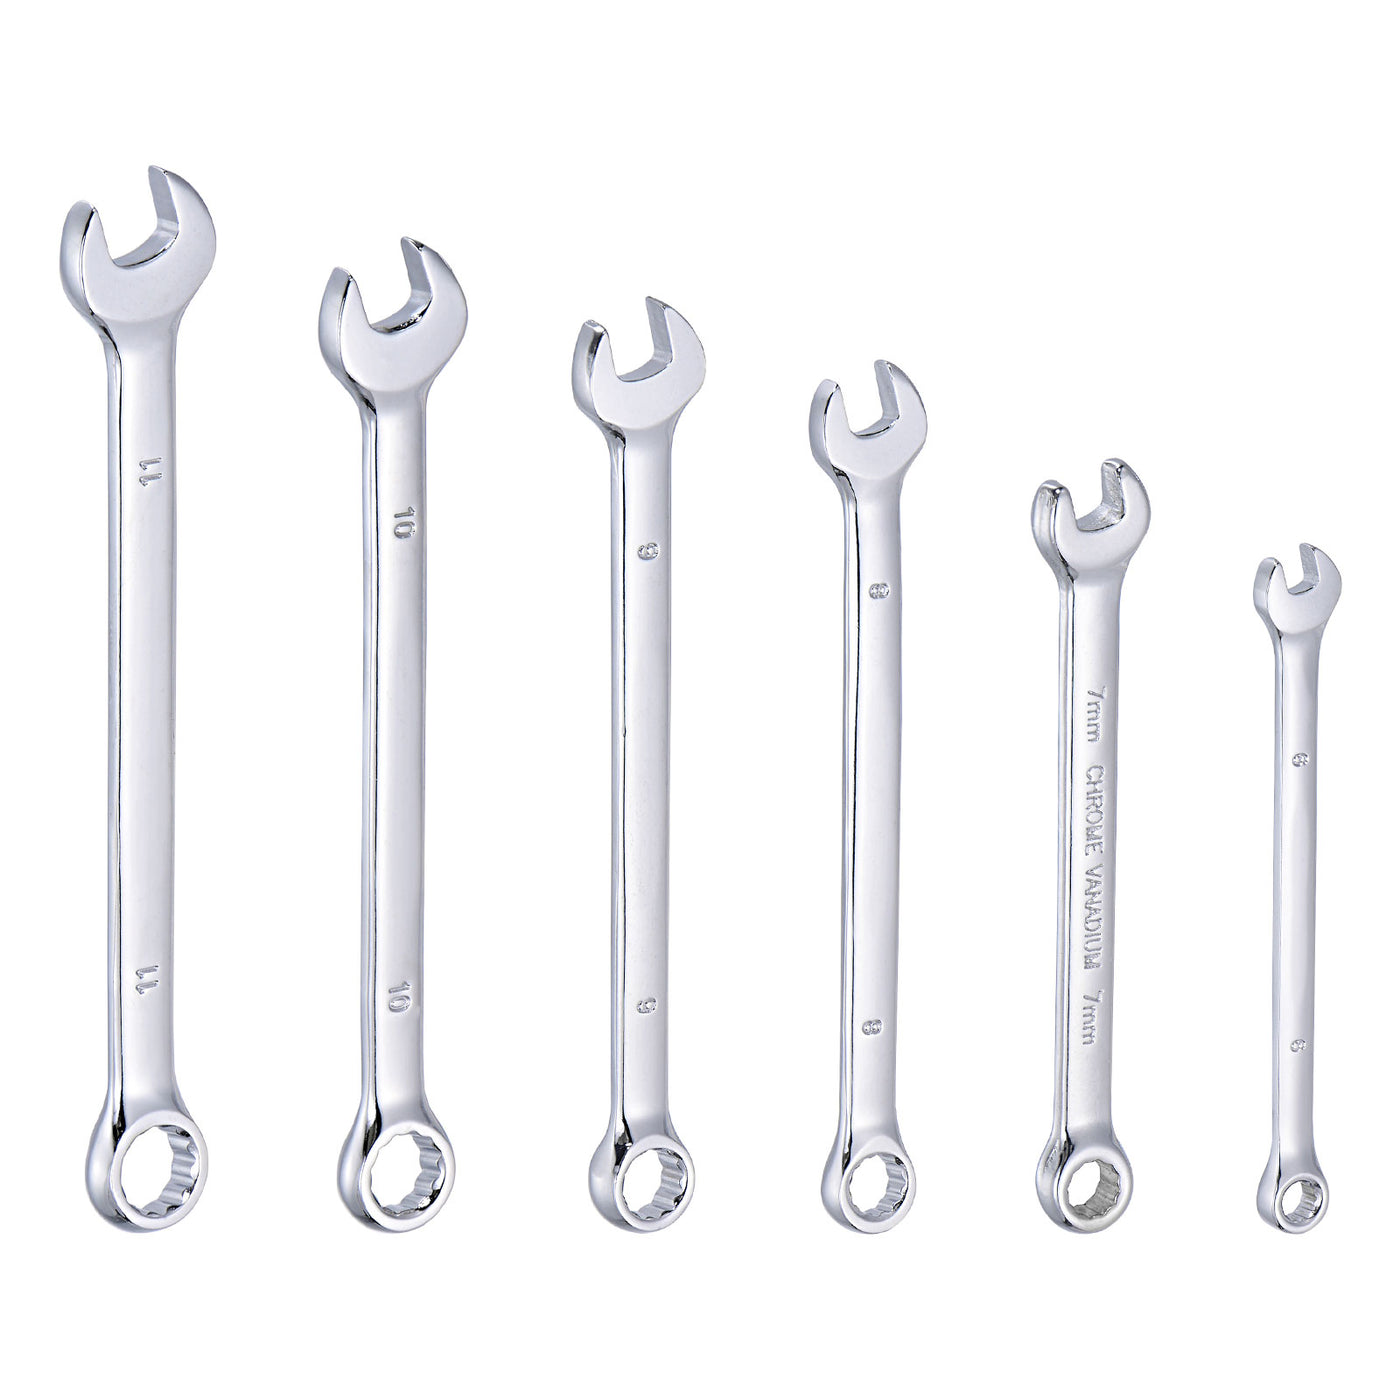 uxcell Uxcell Combination Wrench Set, 6-11mm Open End and Box End with Rolling Pouch, 6-Piece